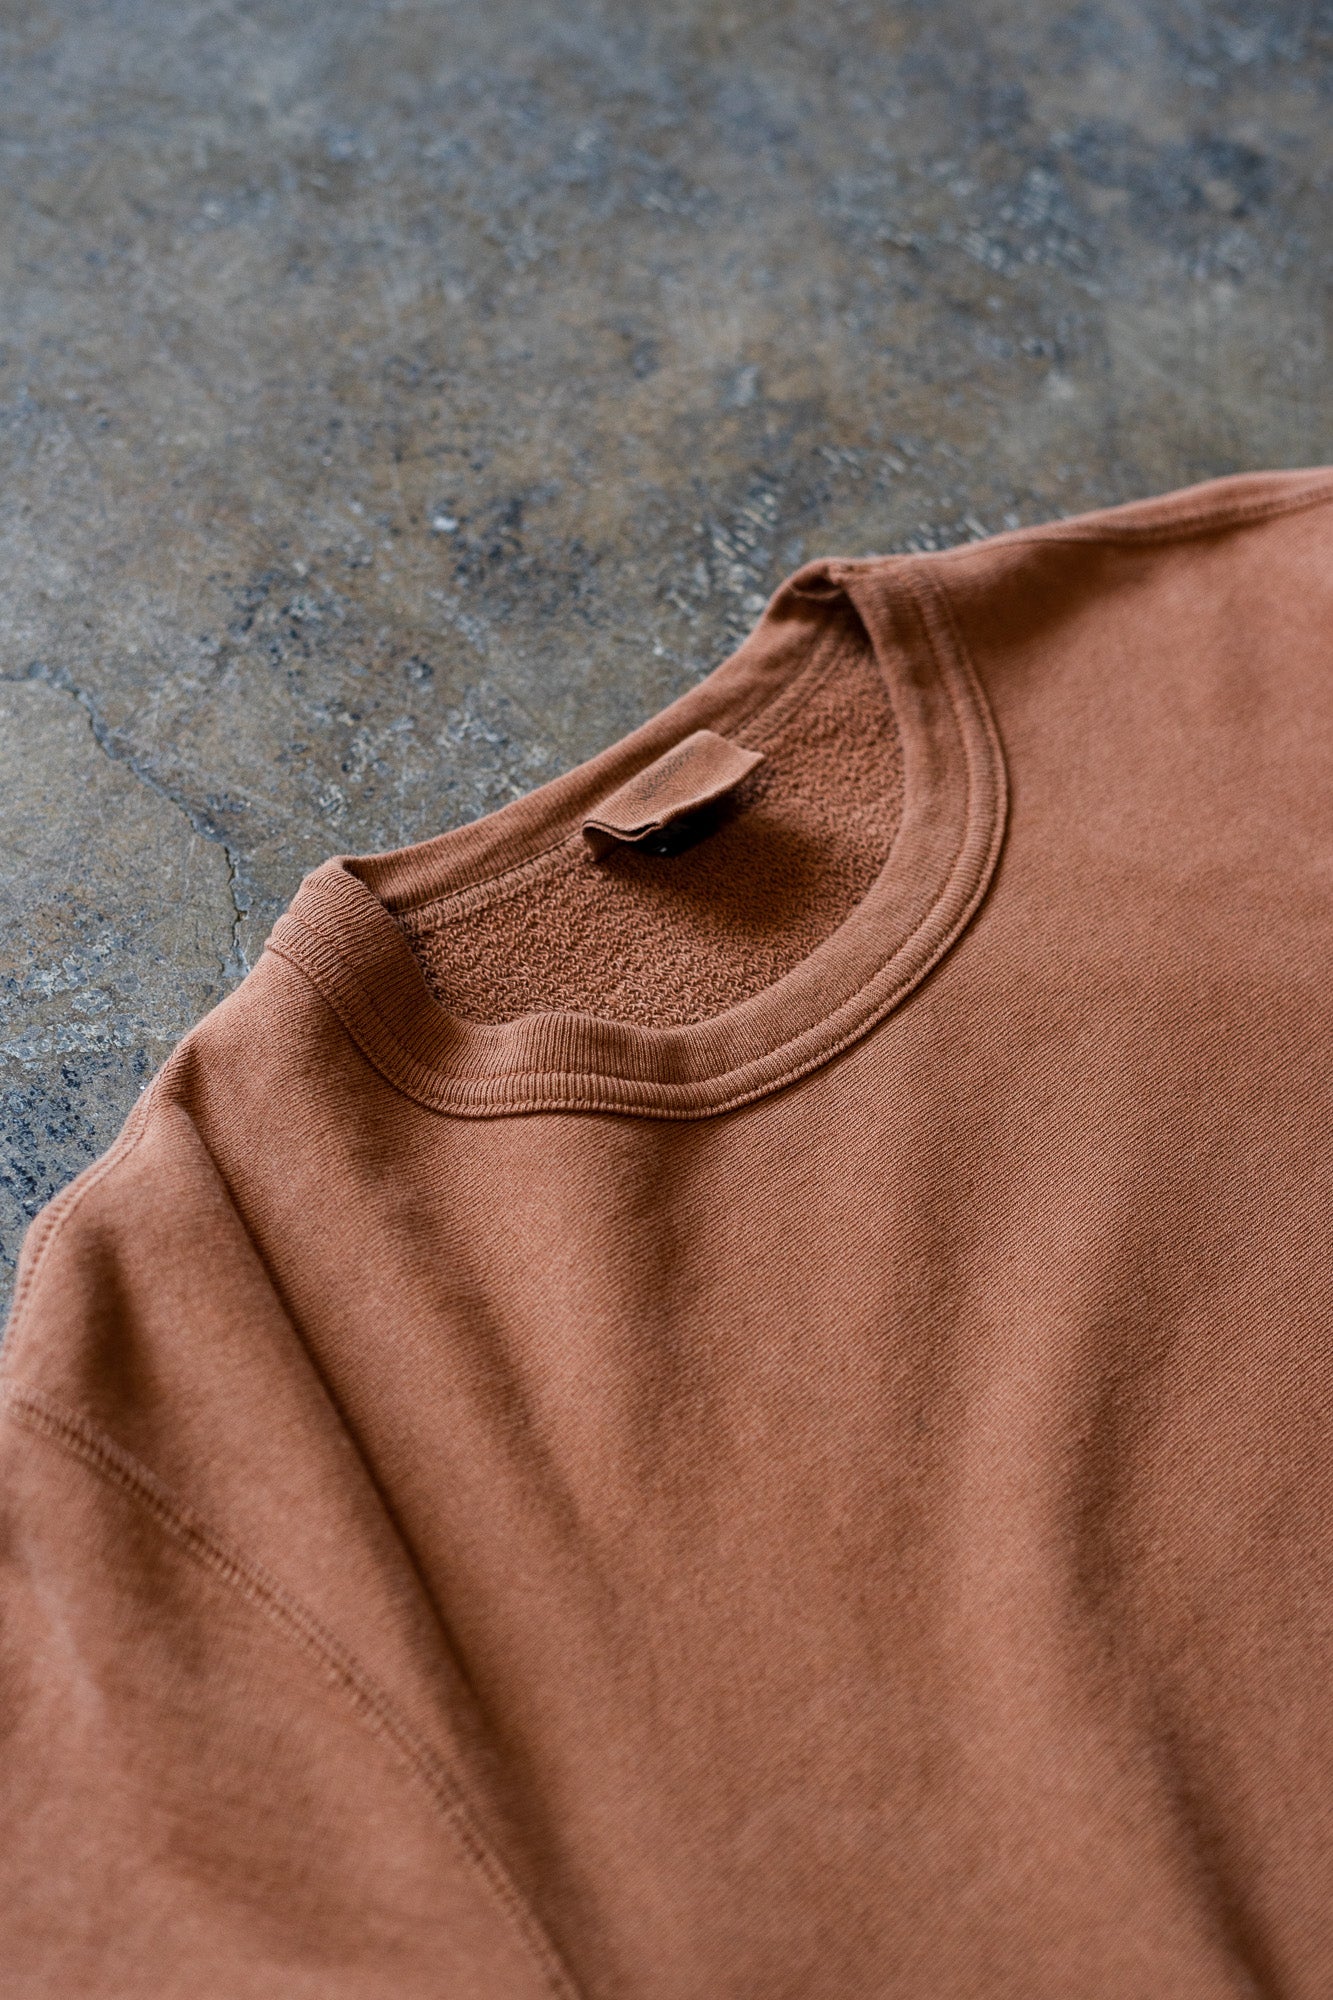 A close up view of the clove crewneck sweatshirt lying on the ground.